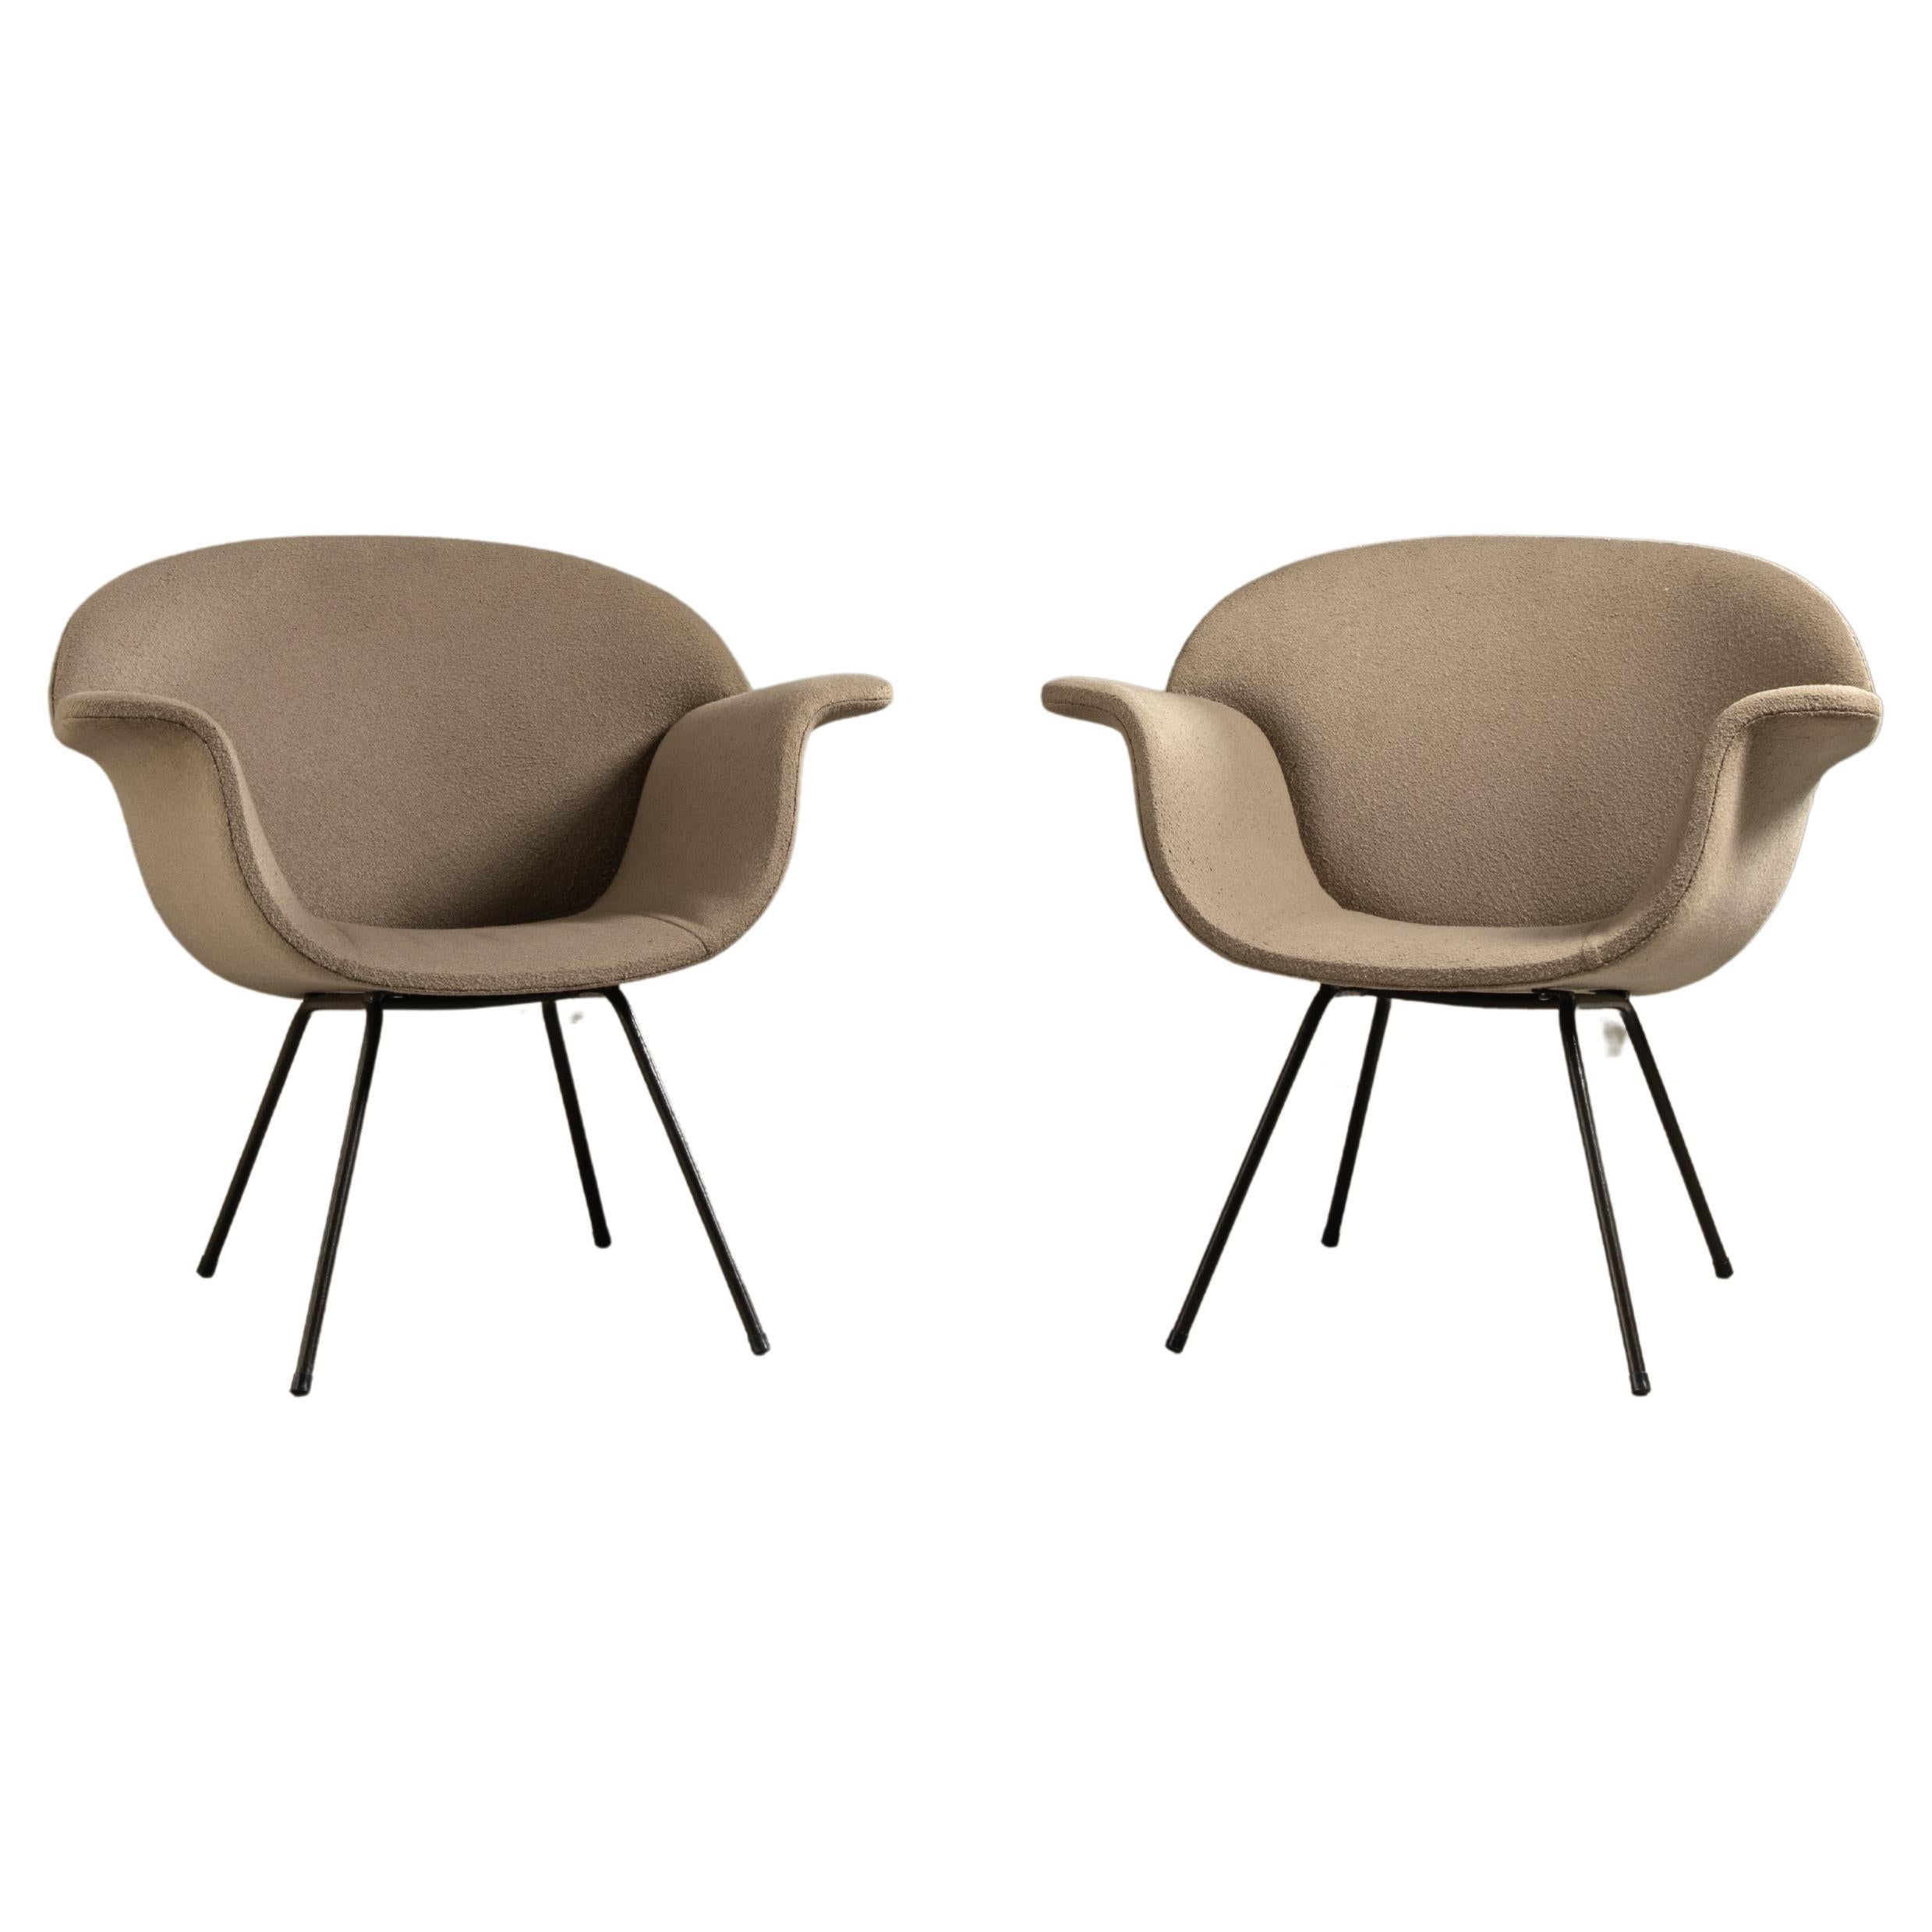 Pair of armchairs in grey fabric, by Carlo Hauner, Brazilian Mid-Century Modern For Sale